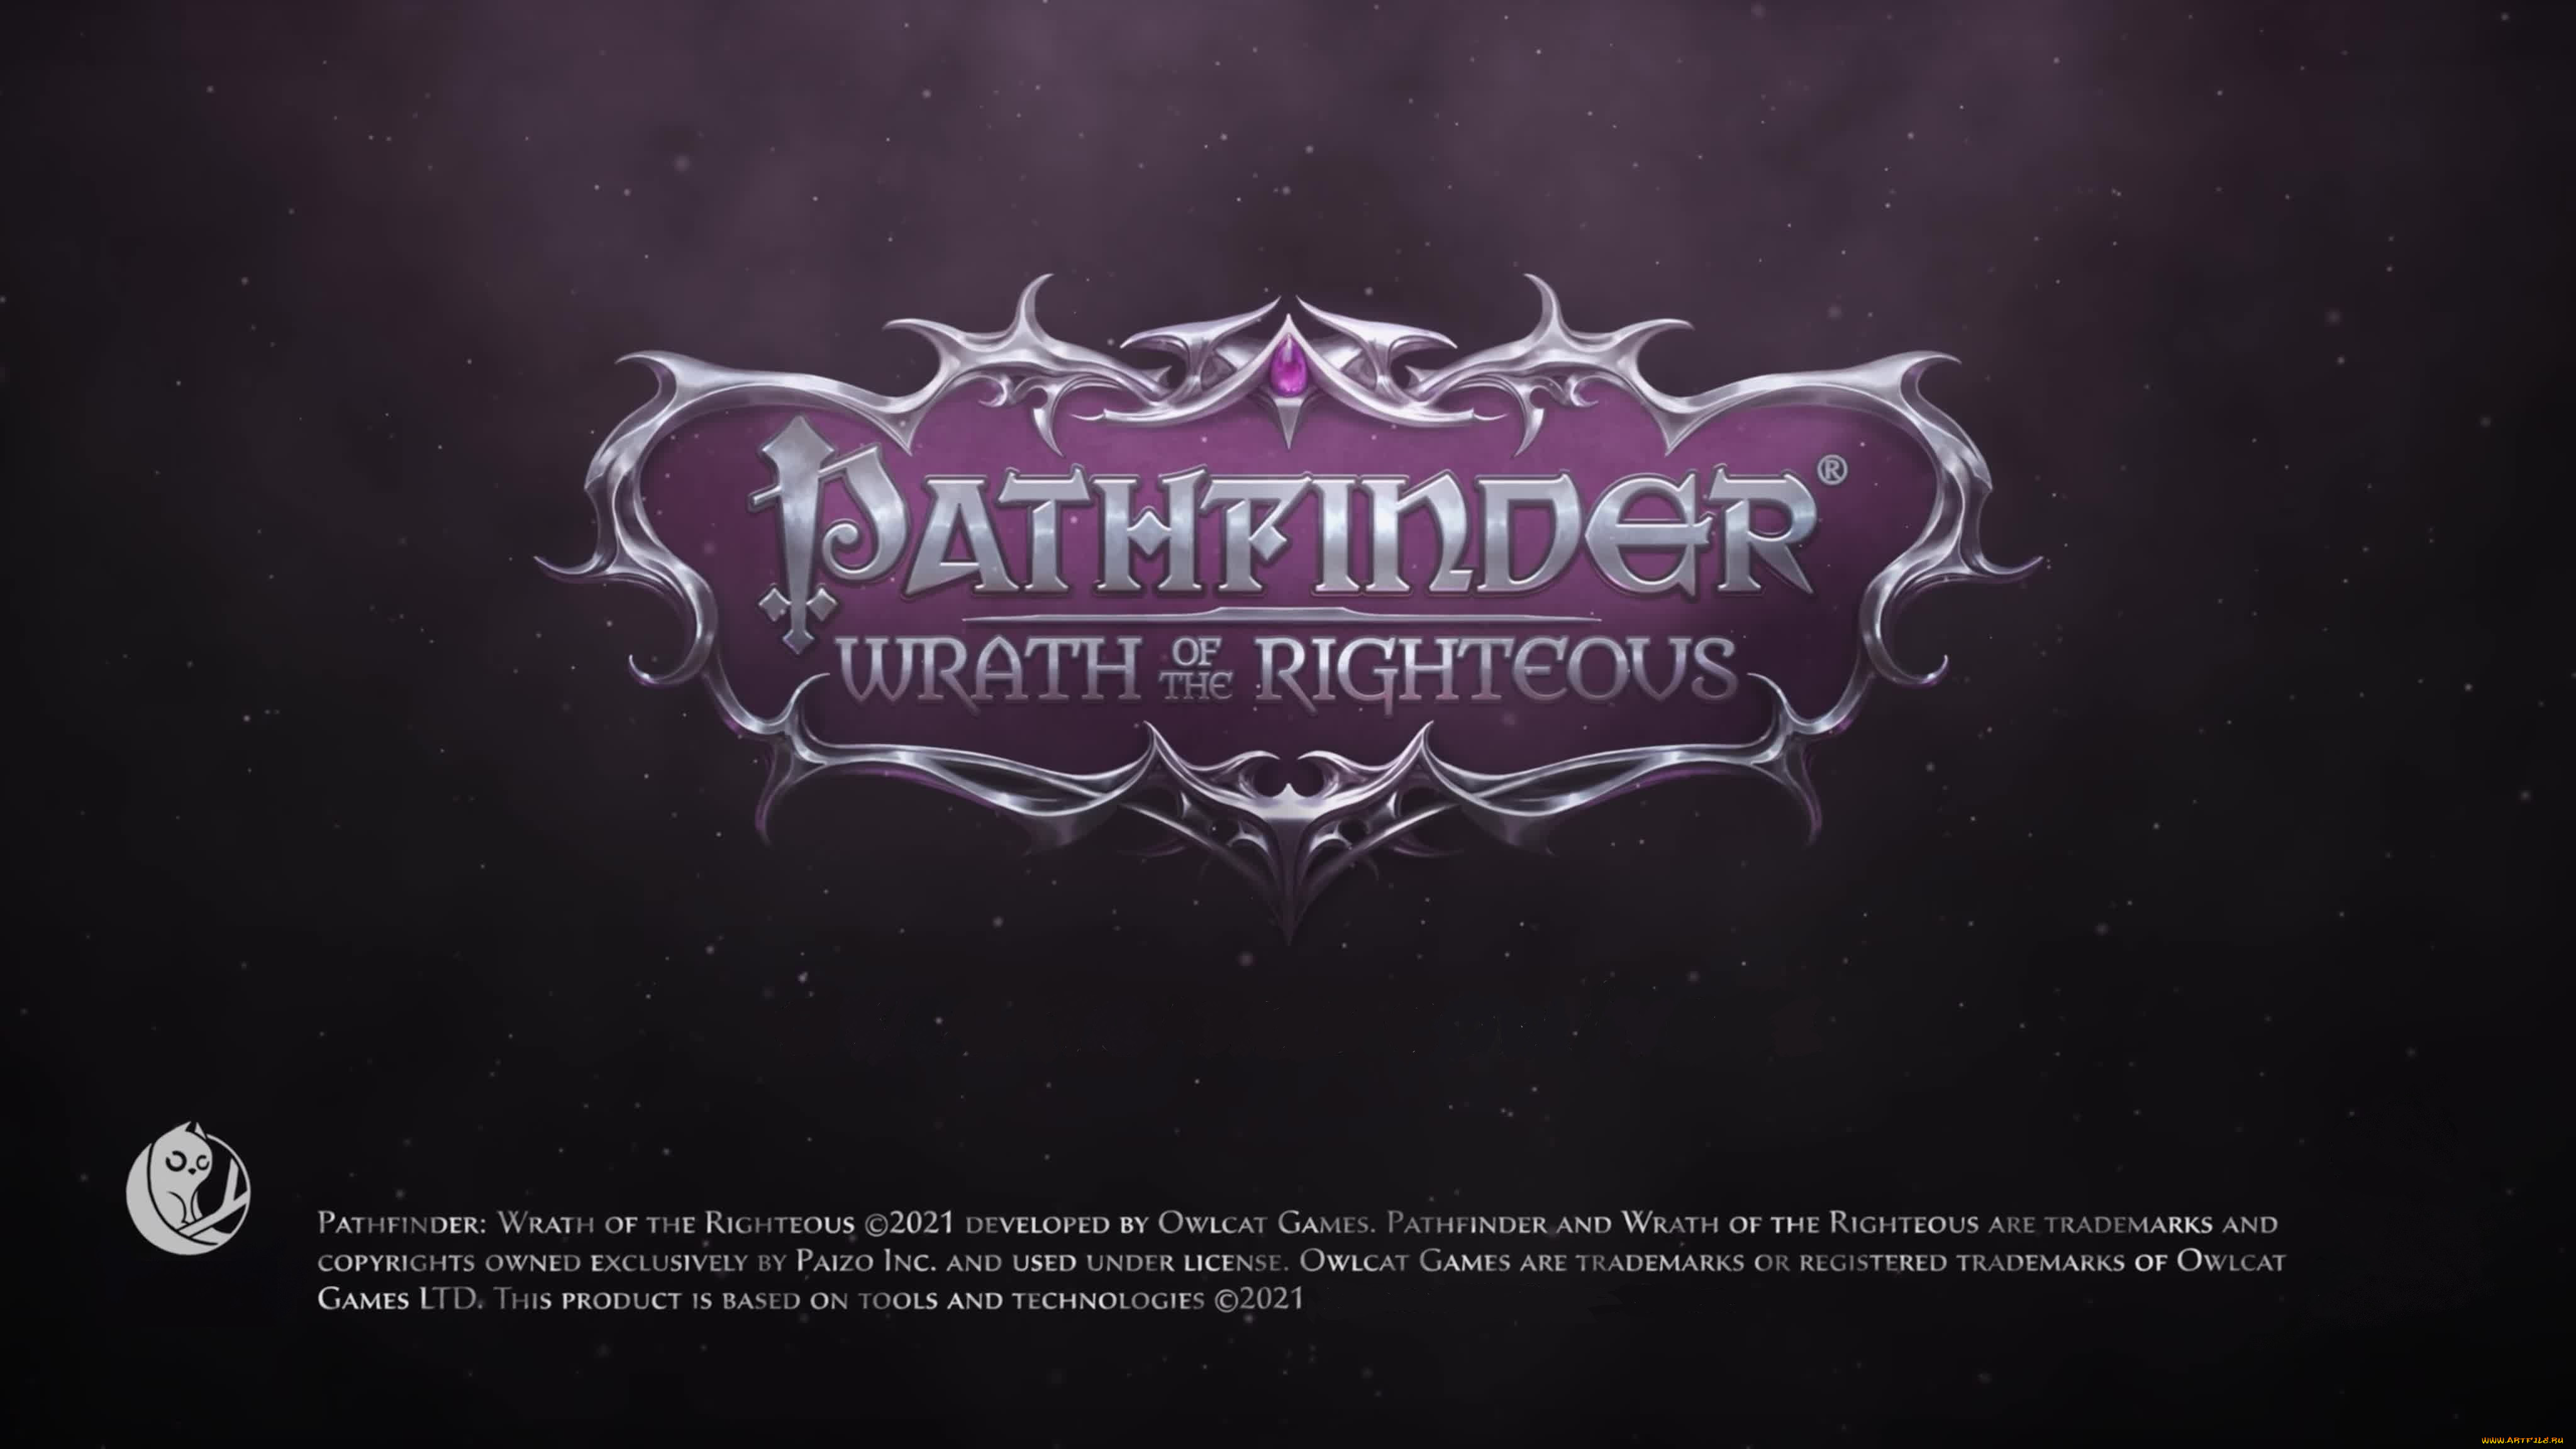 Pathfinder righteous. Pathfinder: Wrath of the Righteous. Pathfinder: Wrath of the Righteous игра. Pathfinder: Wrath of the Righteous, OWLCAT games. Pathfinder Wrath of the Righteous компания.